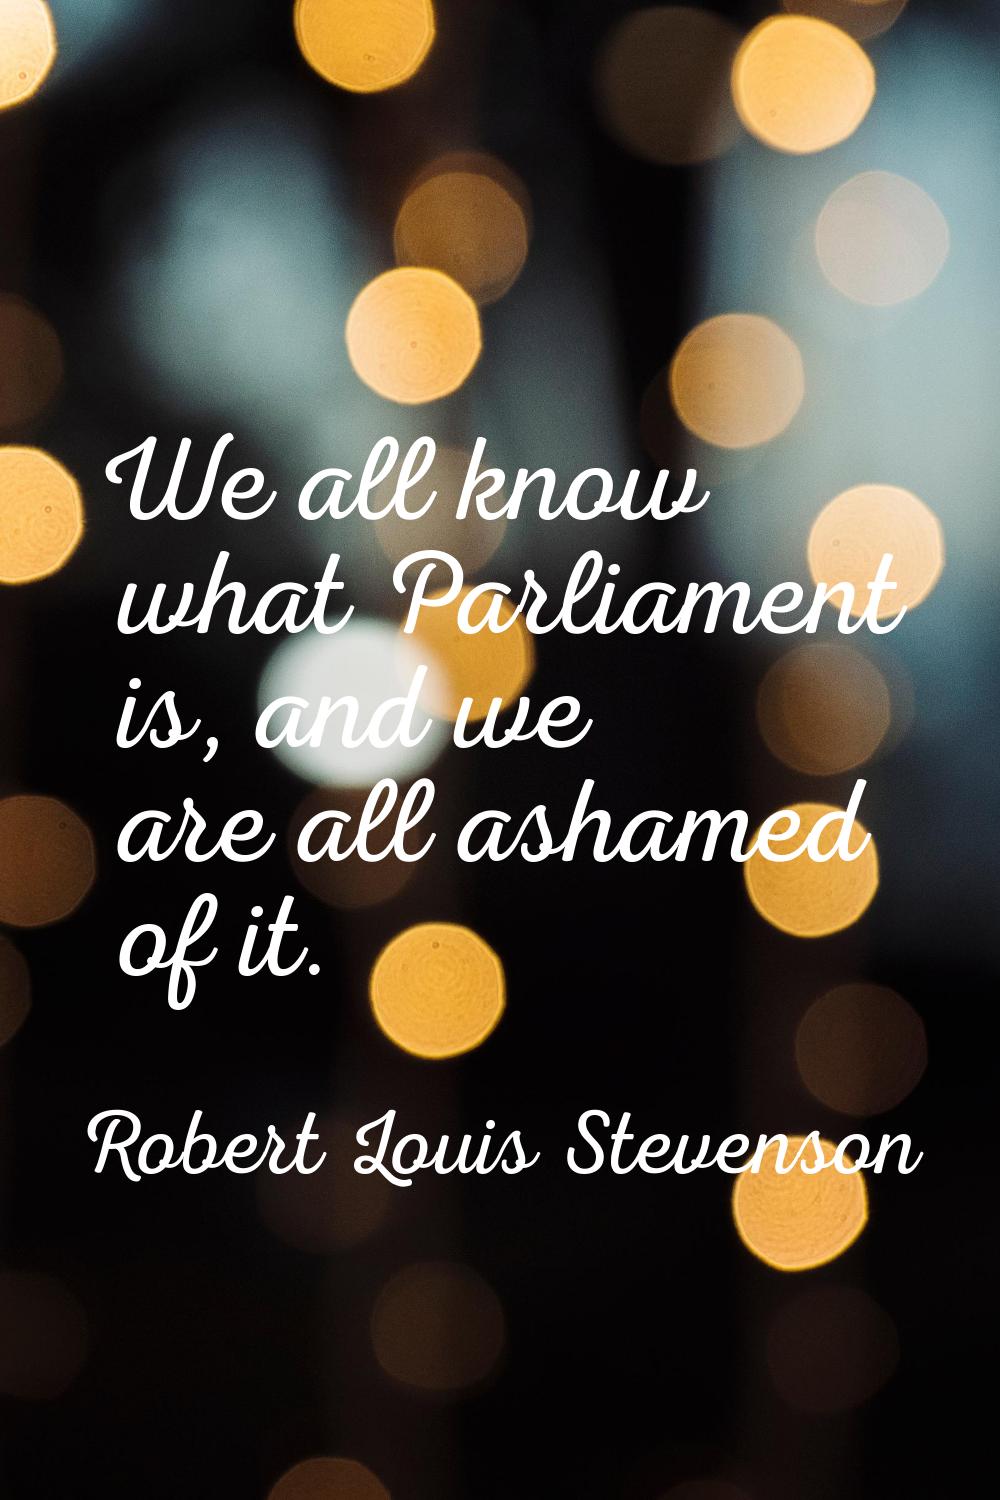 We all know what Parliament is, and we are all ashamed of it.